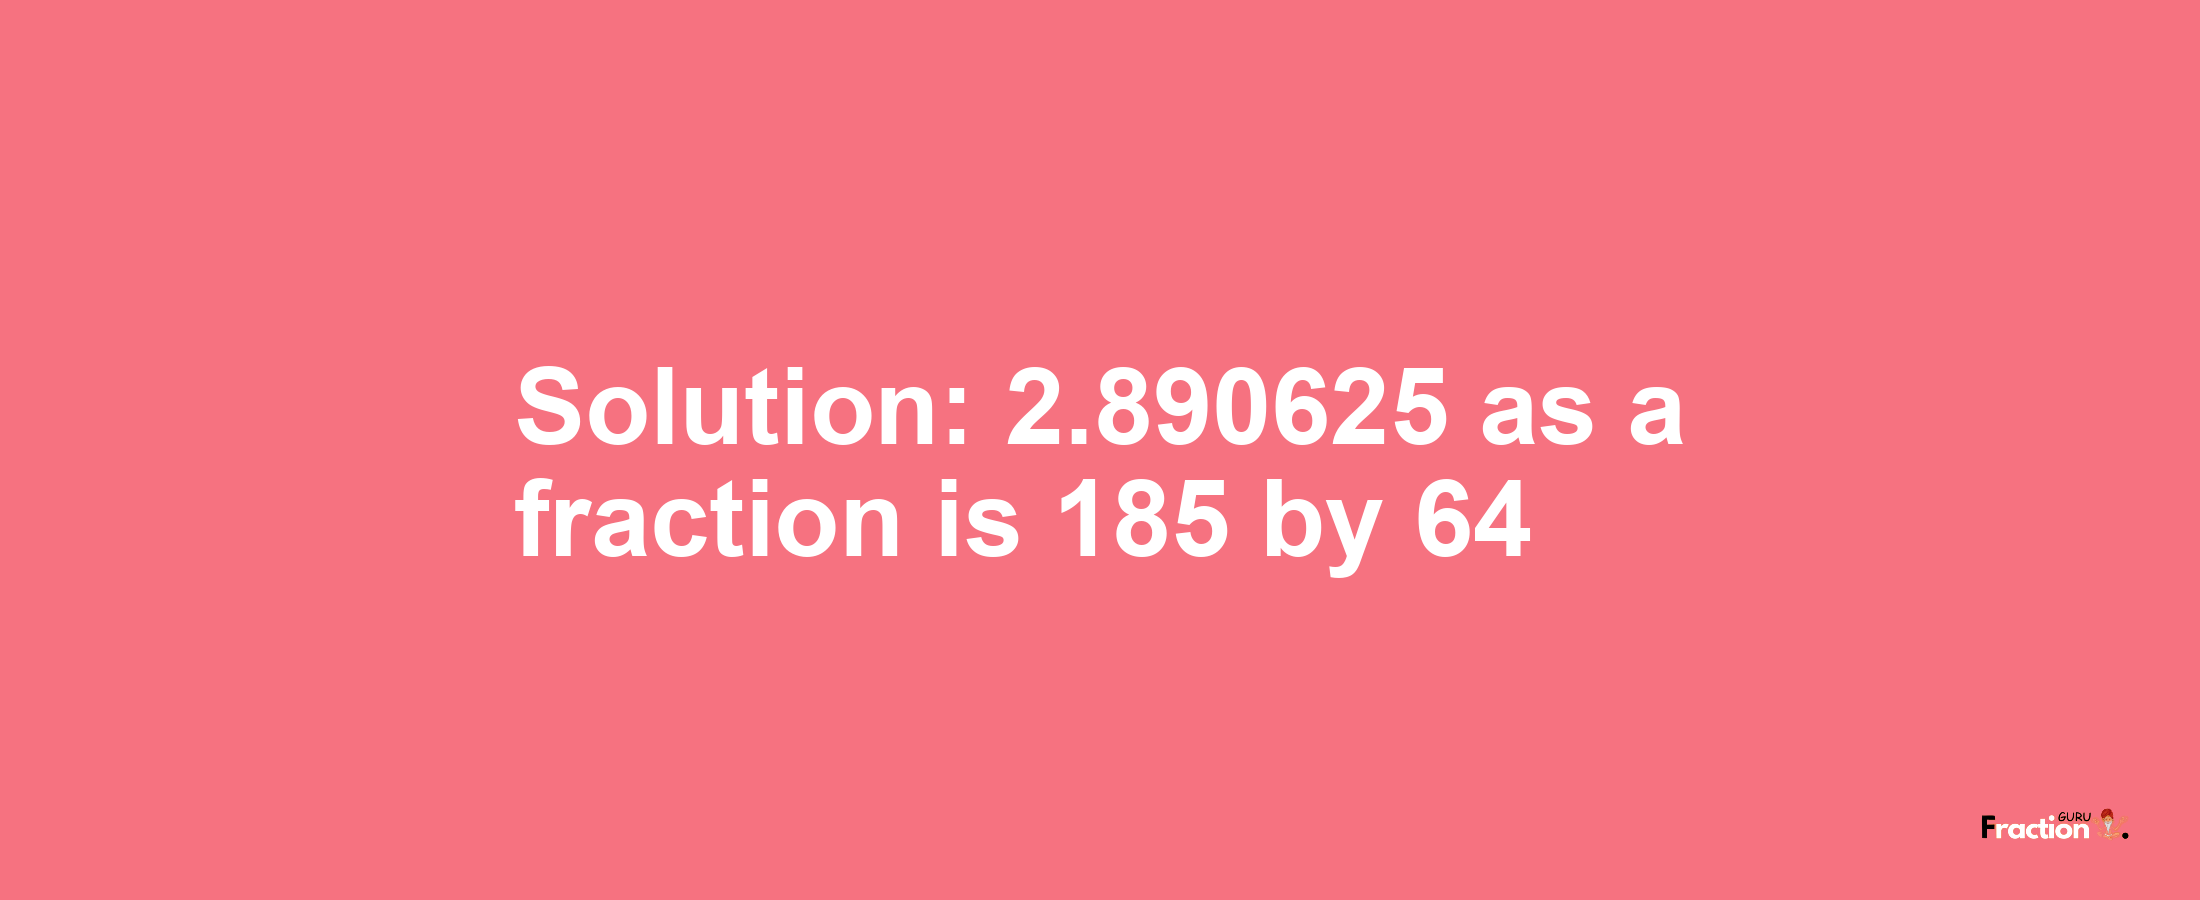 Solution:2.890625 as a fraction is 185/64